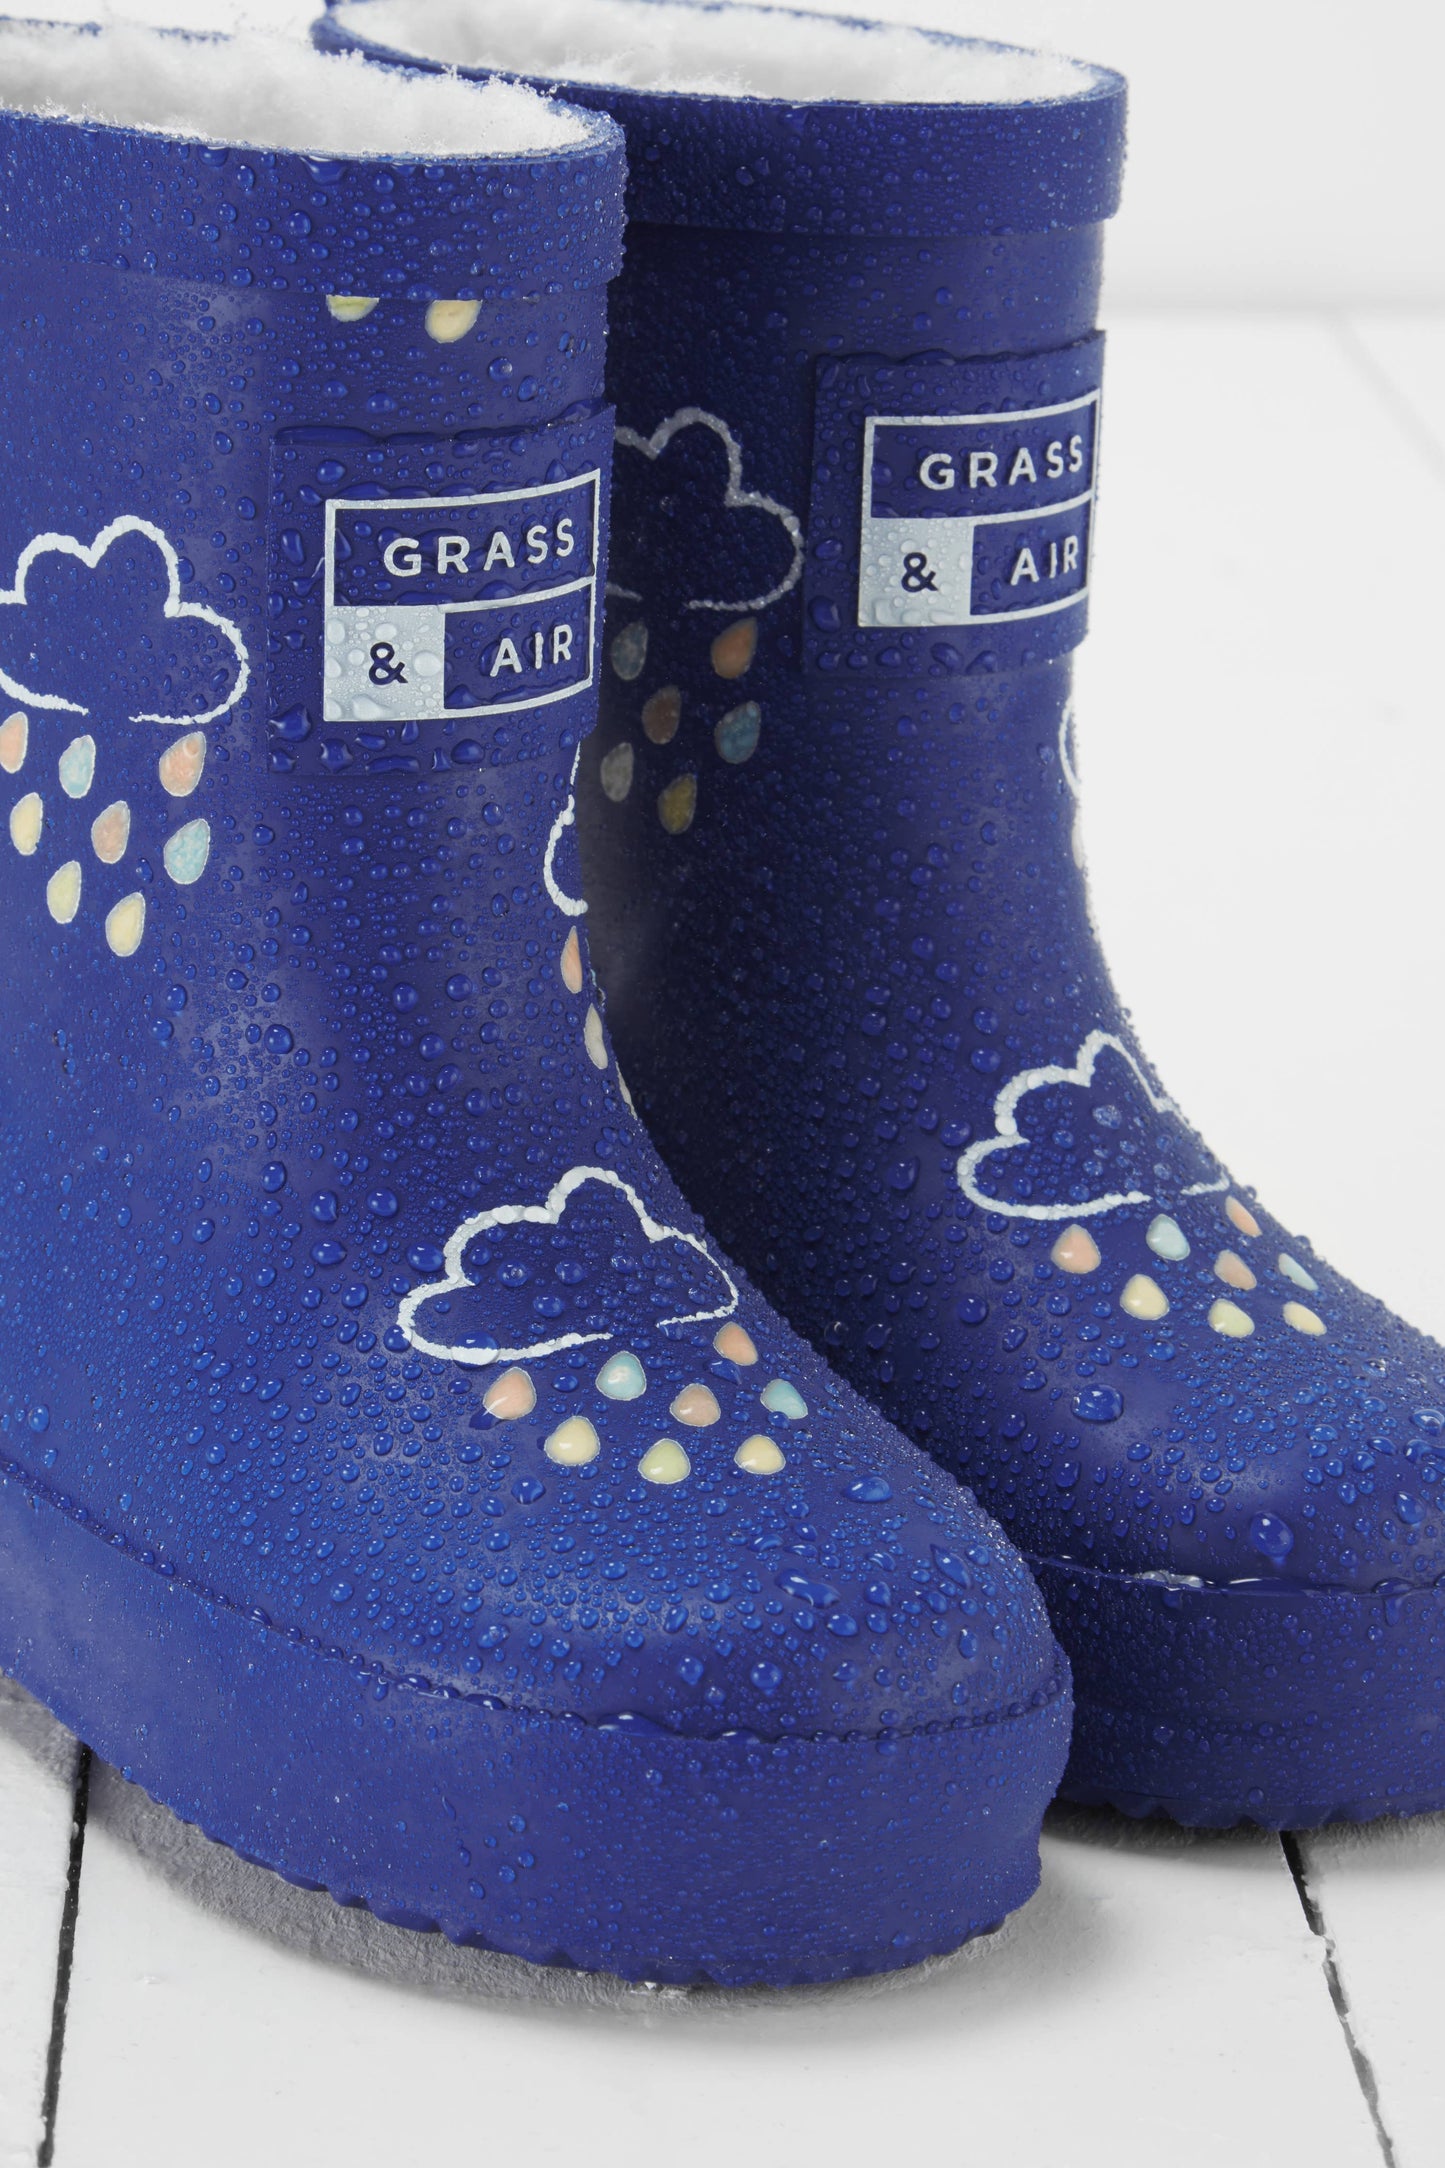 Inky Blue Colour-Changing Kids Wellies